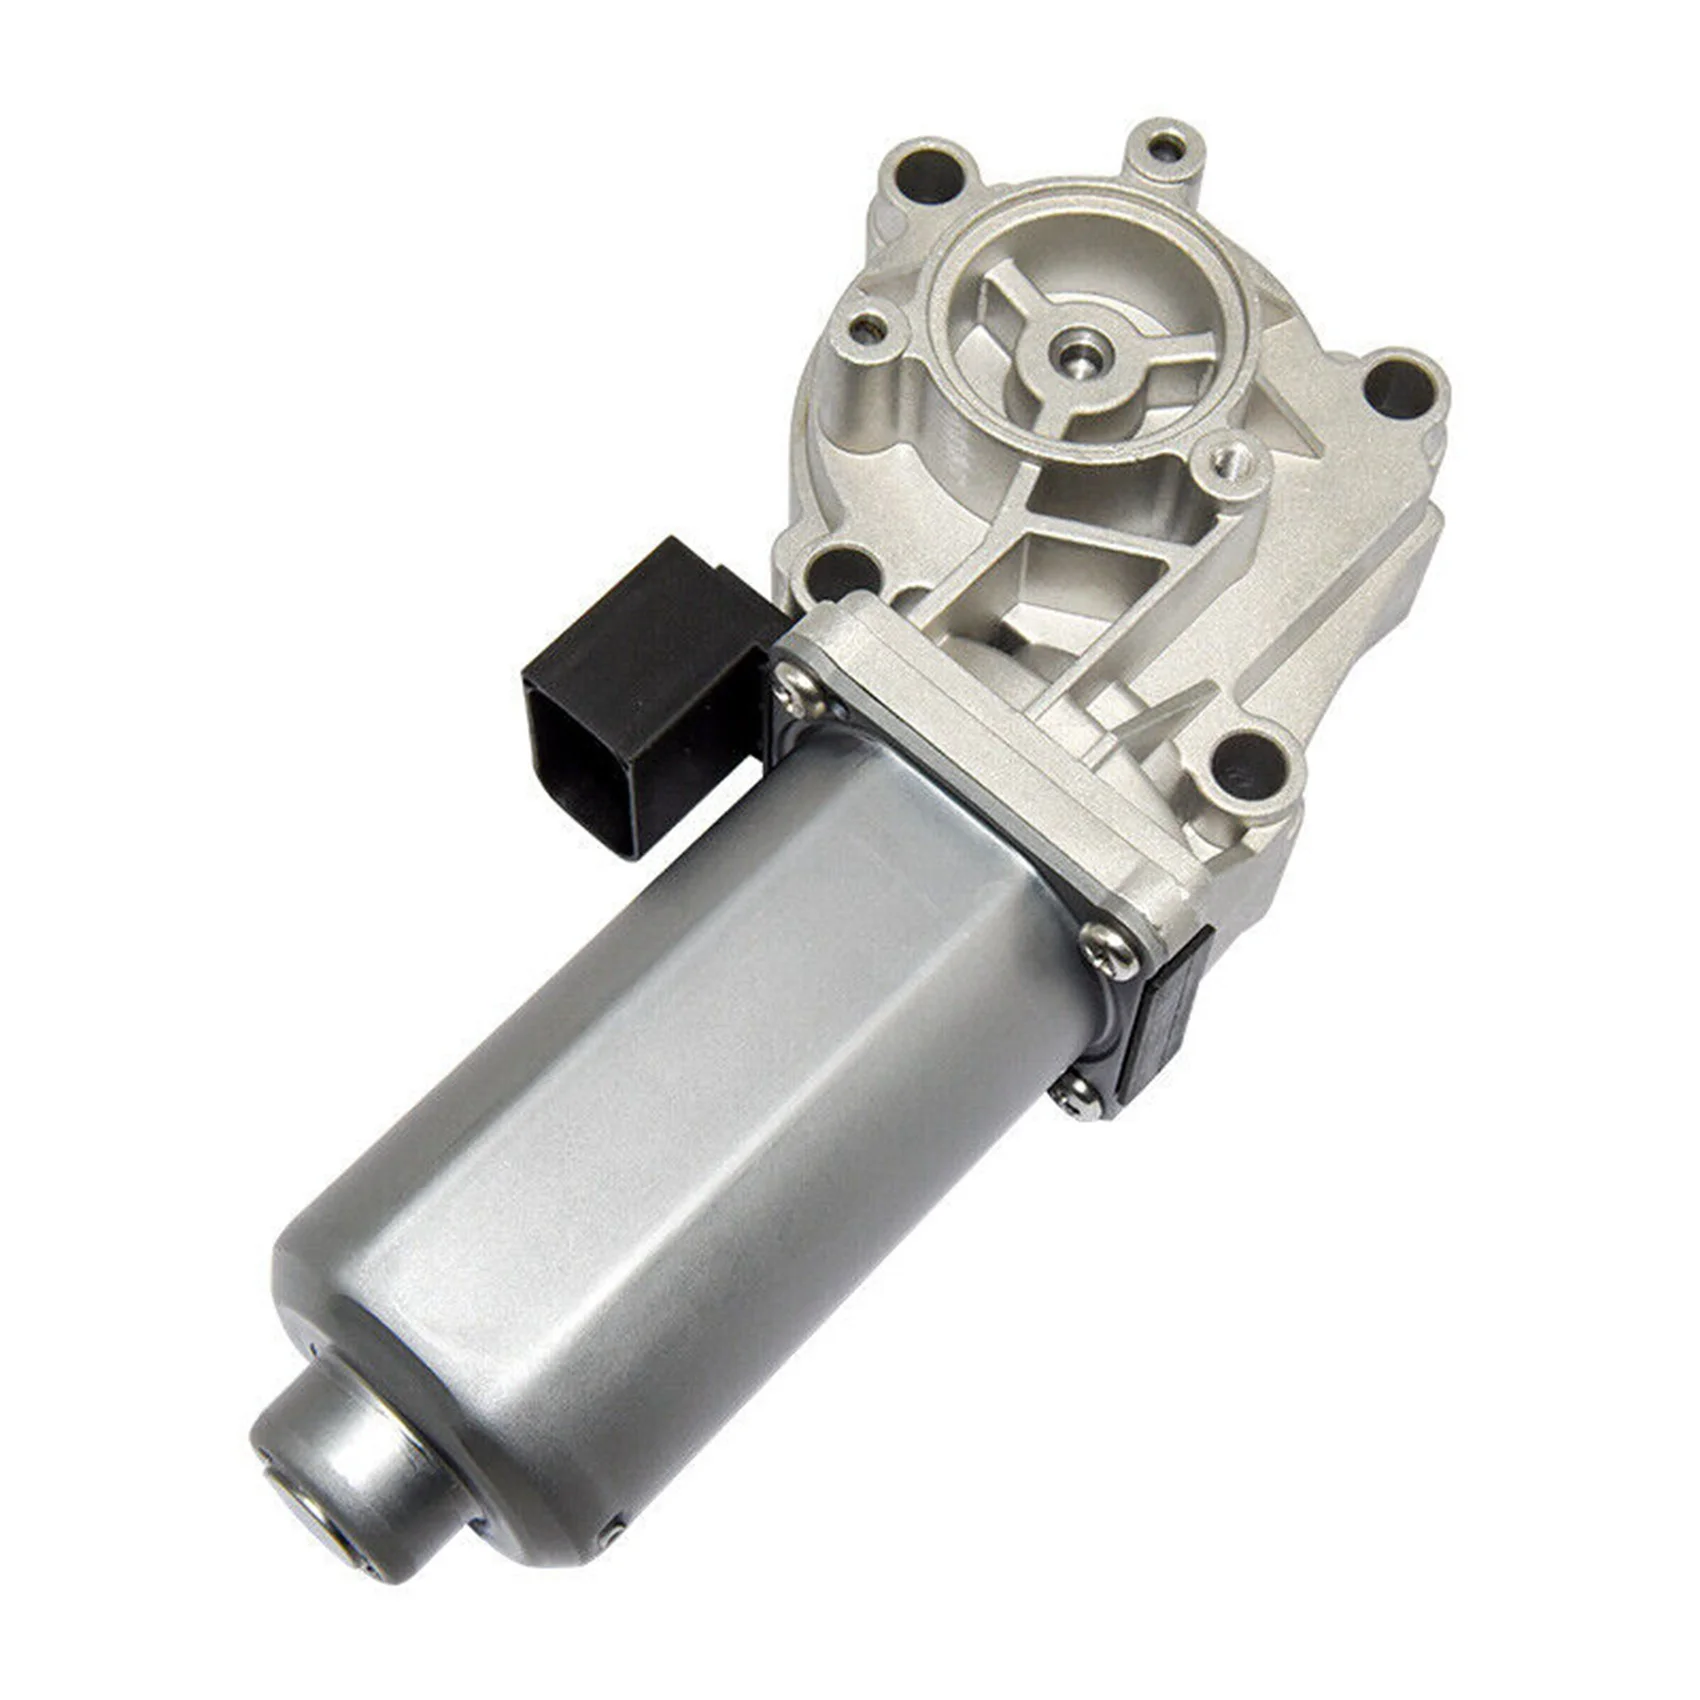 

Brand New Transfer Case Shift Actuator Motor Fit for X3 / X5 600-932 27107566296 27107568267